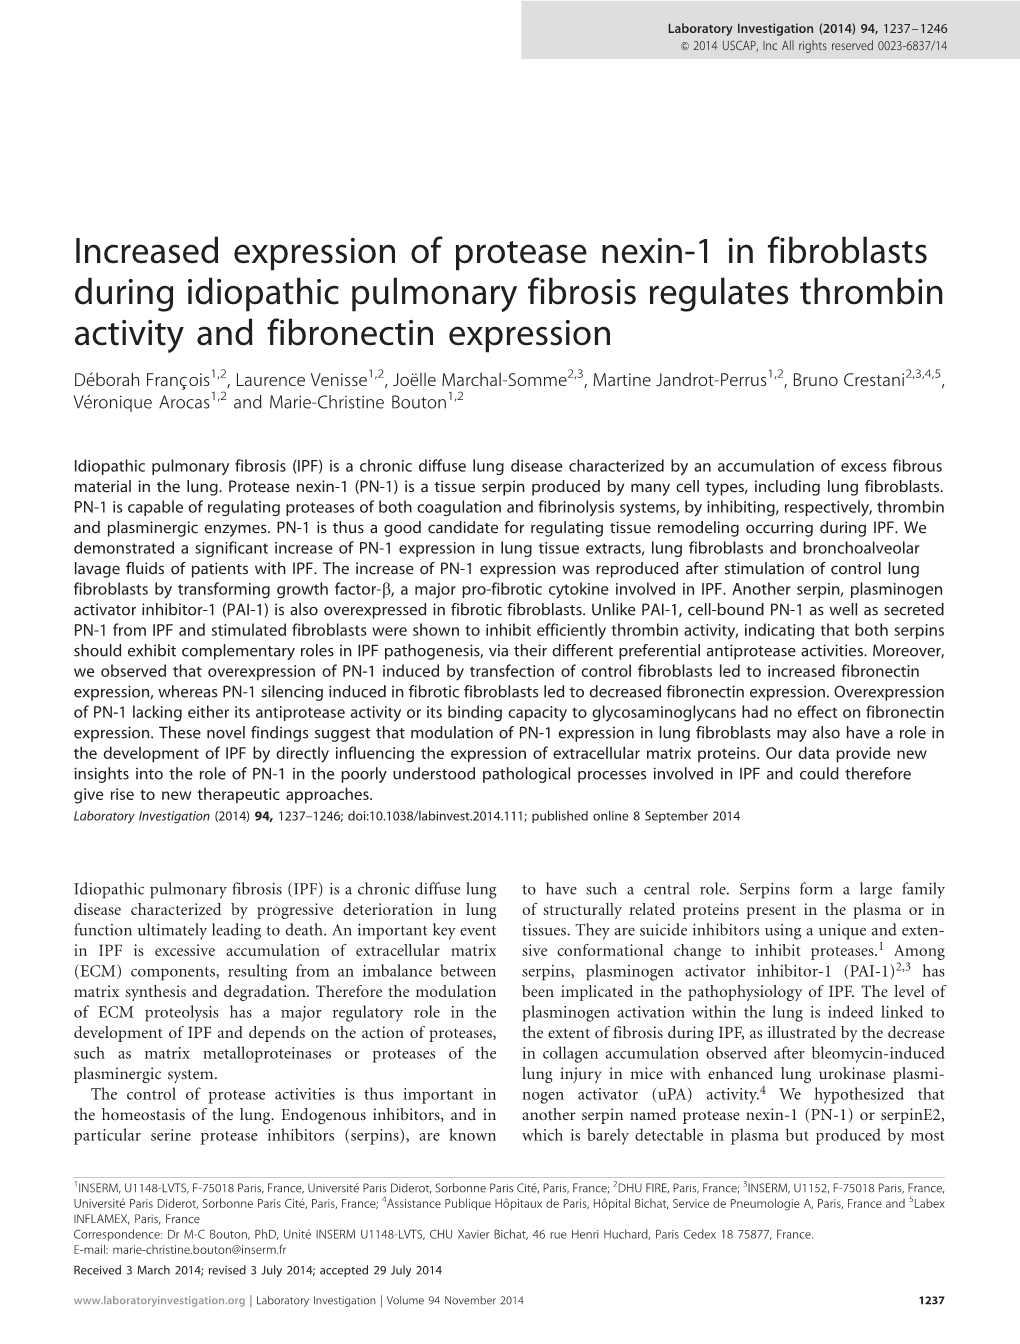 Increased Expression of Protease Nexin-1 in Fibroblasts During